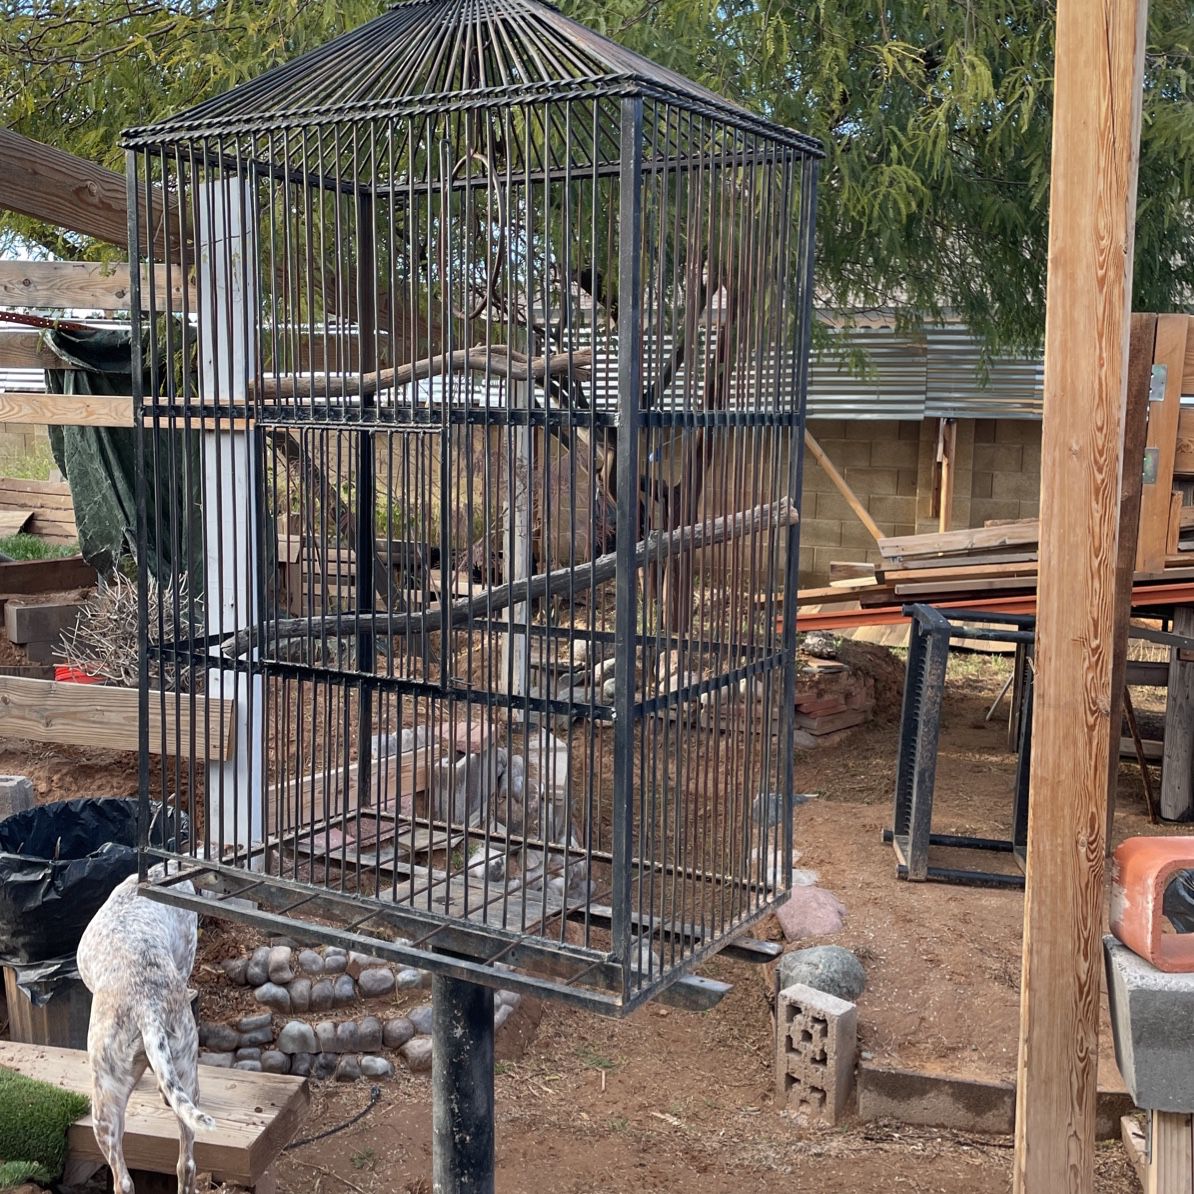 1962 Birdcage Only One Bird Owned